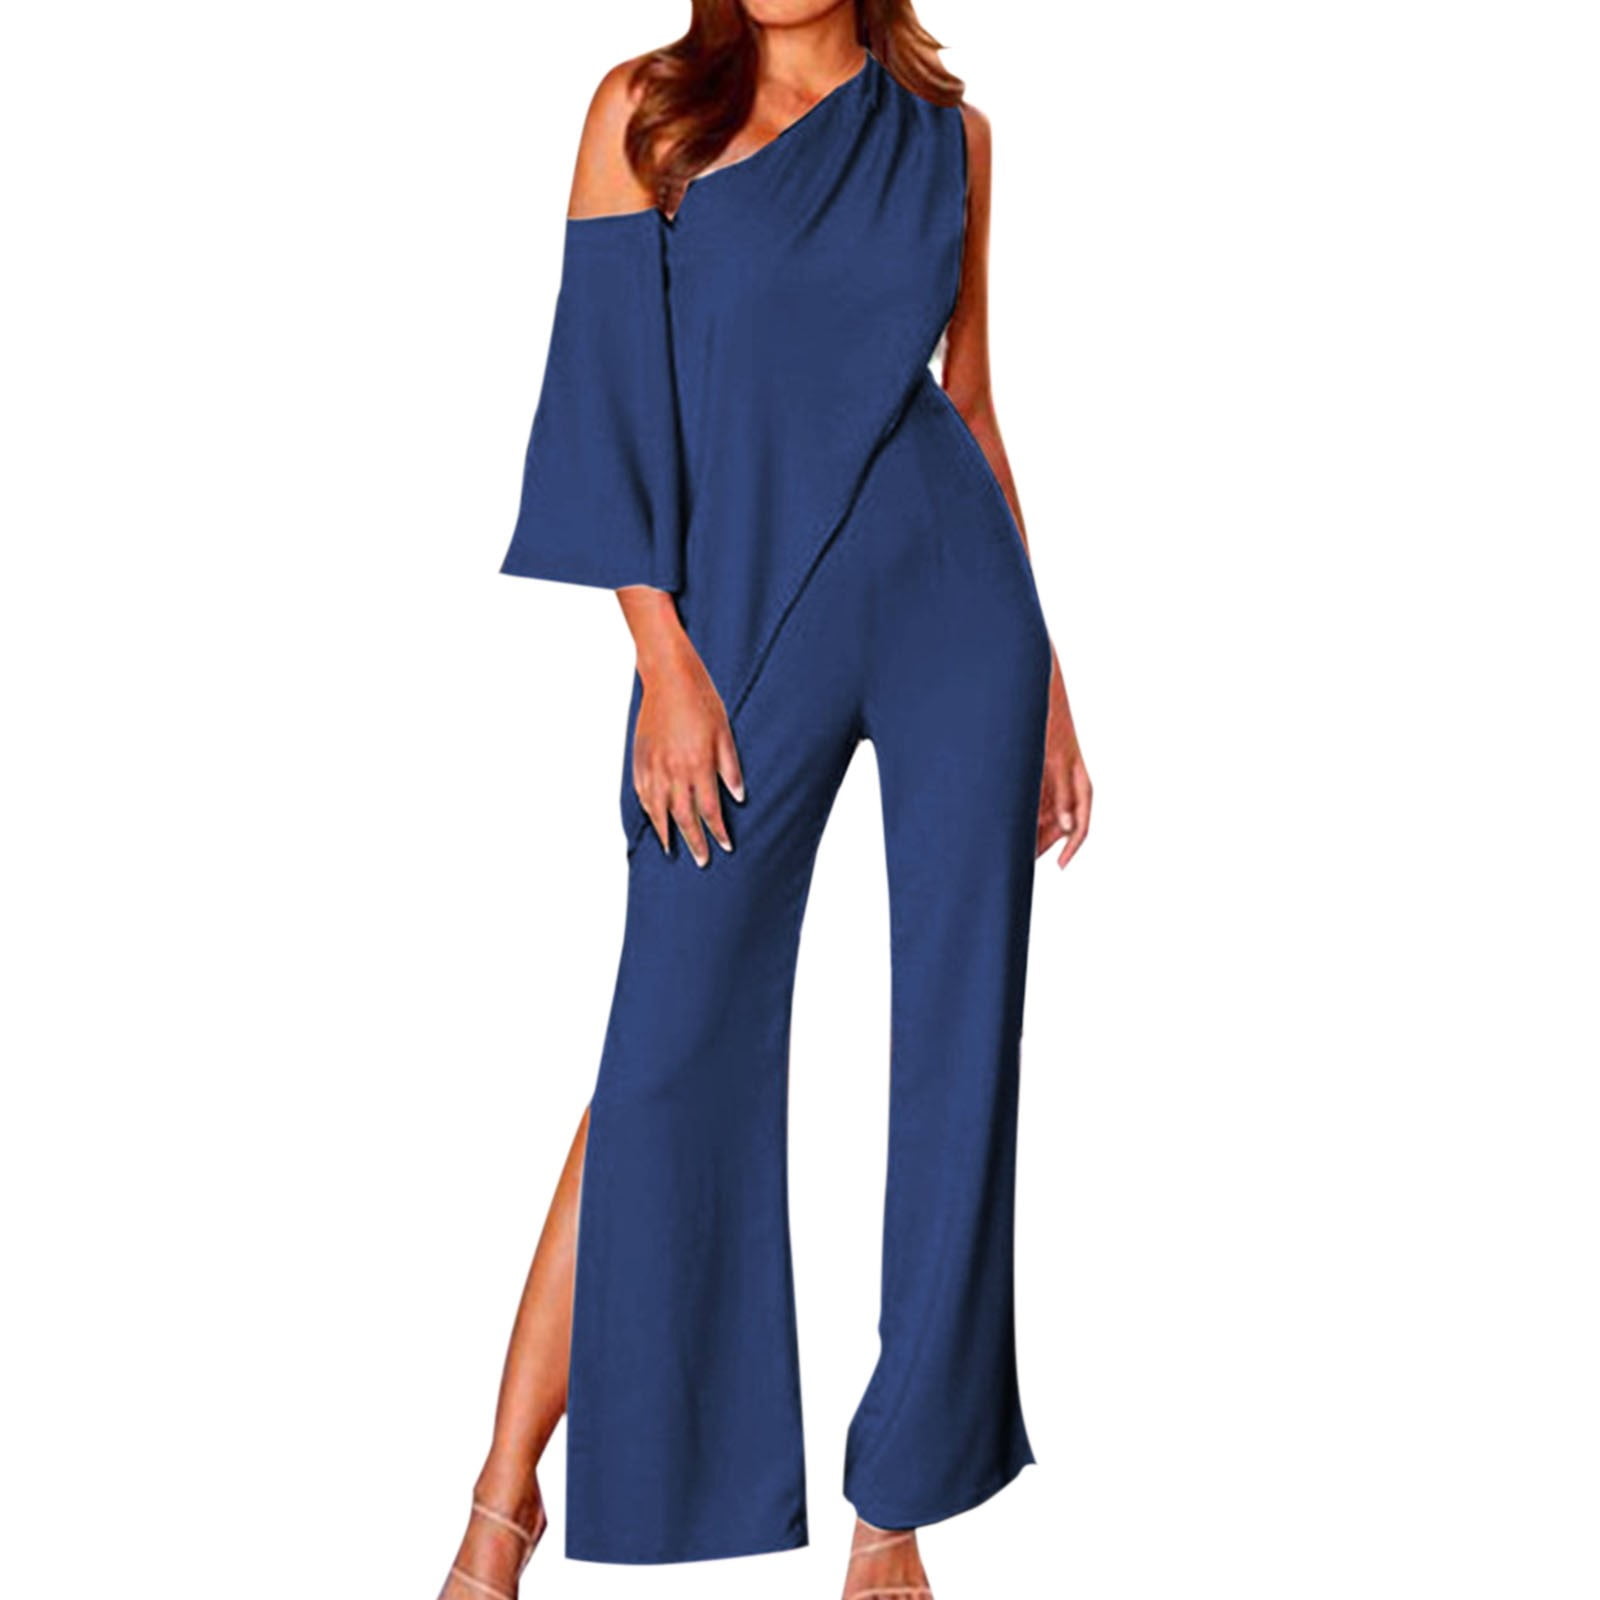 The Complete Jumpsuit Guide for Women With Short Legs - Petite Dressing